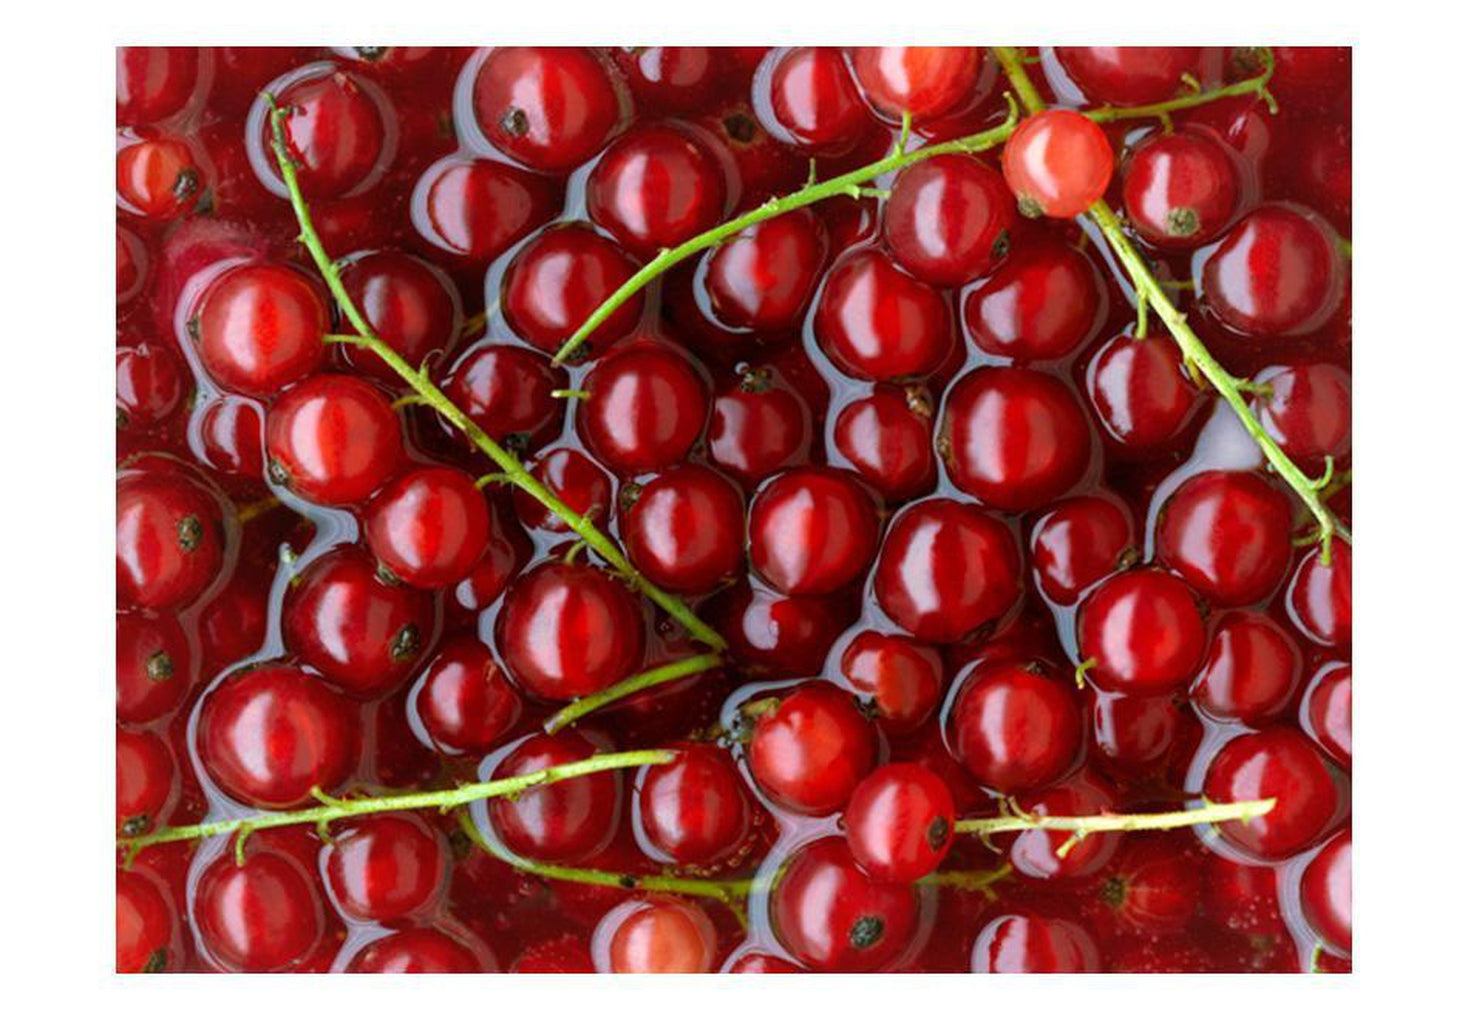 Wall mural - Redcurrants bathed in water-TipTopHomeDecor